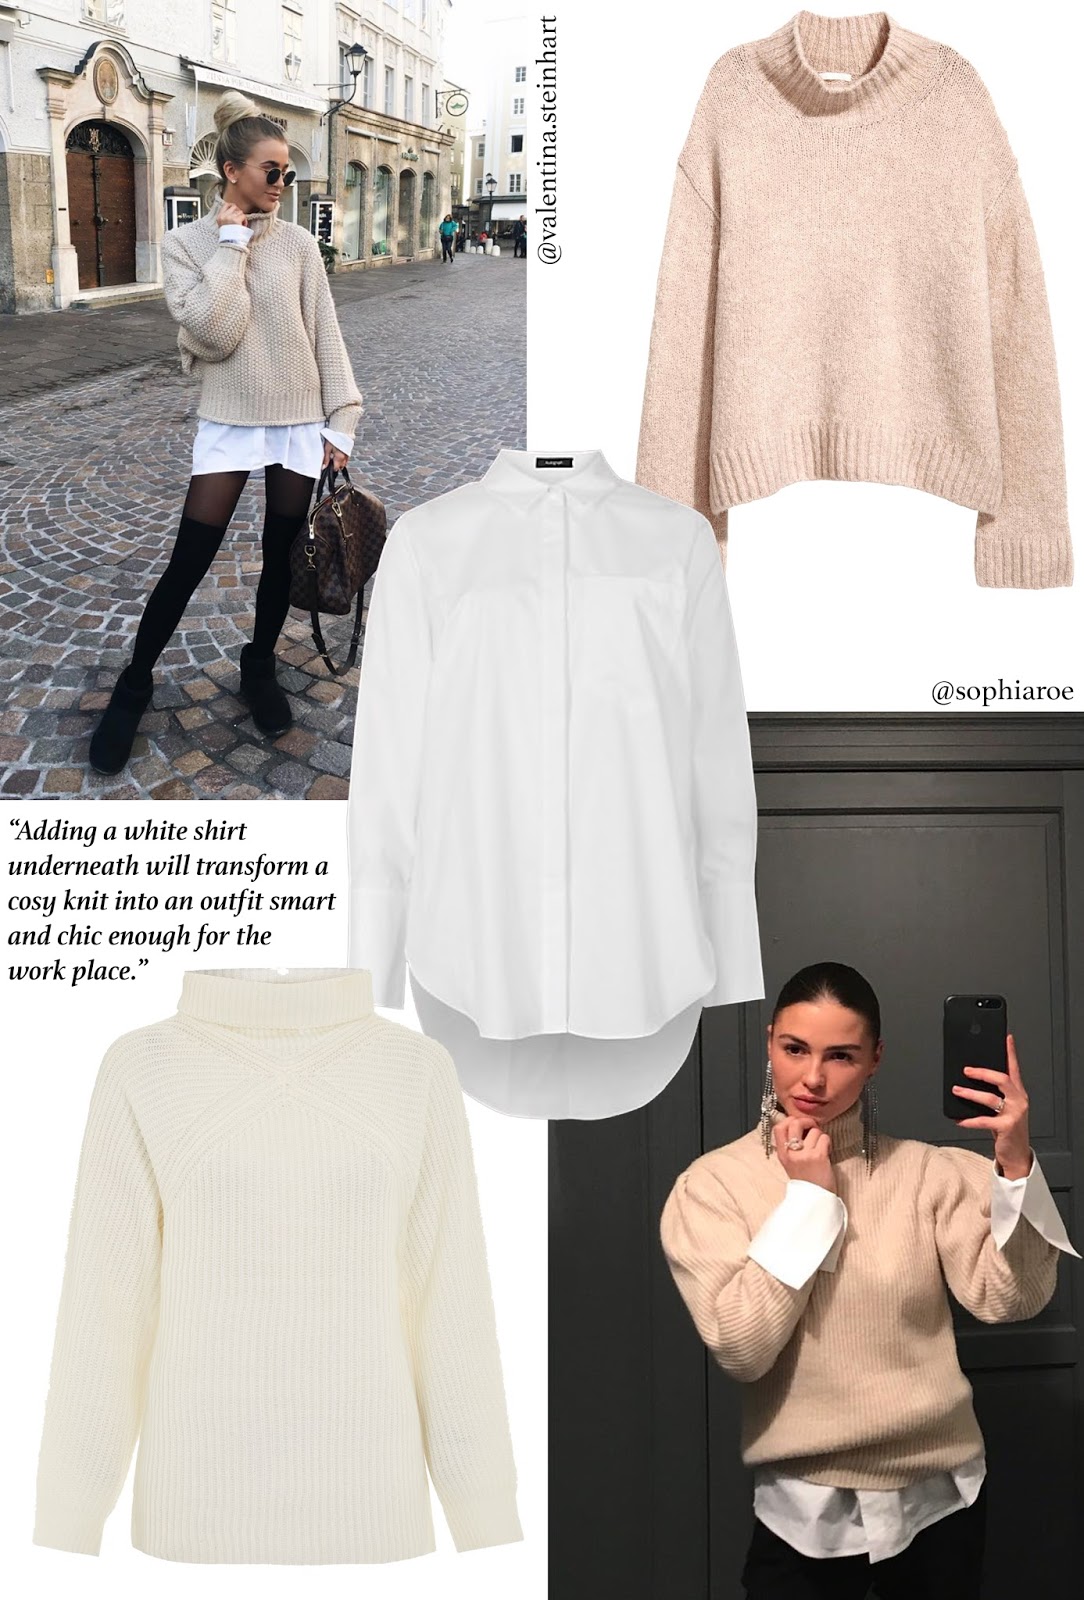 Fashion, Style Set, Fashion Bloggers, AW17, Outfit Ideas, Pink, Jewellery, Knitwear, Lingerie, Trench Coat